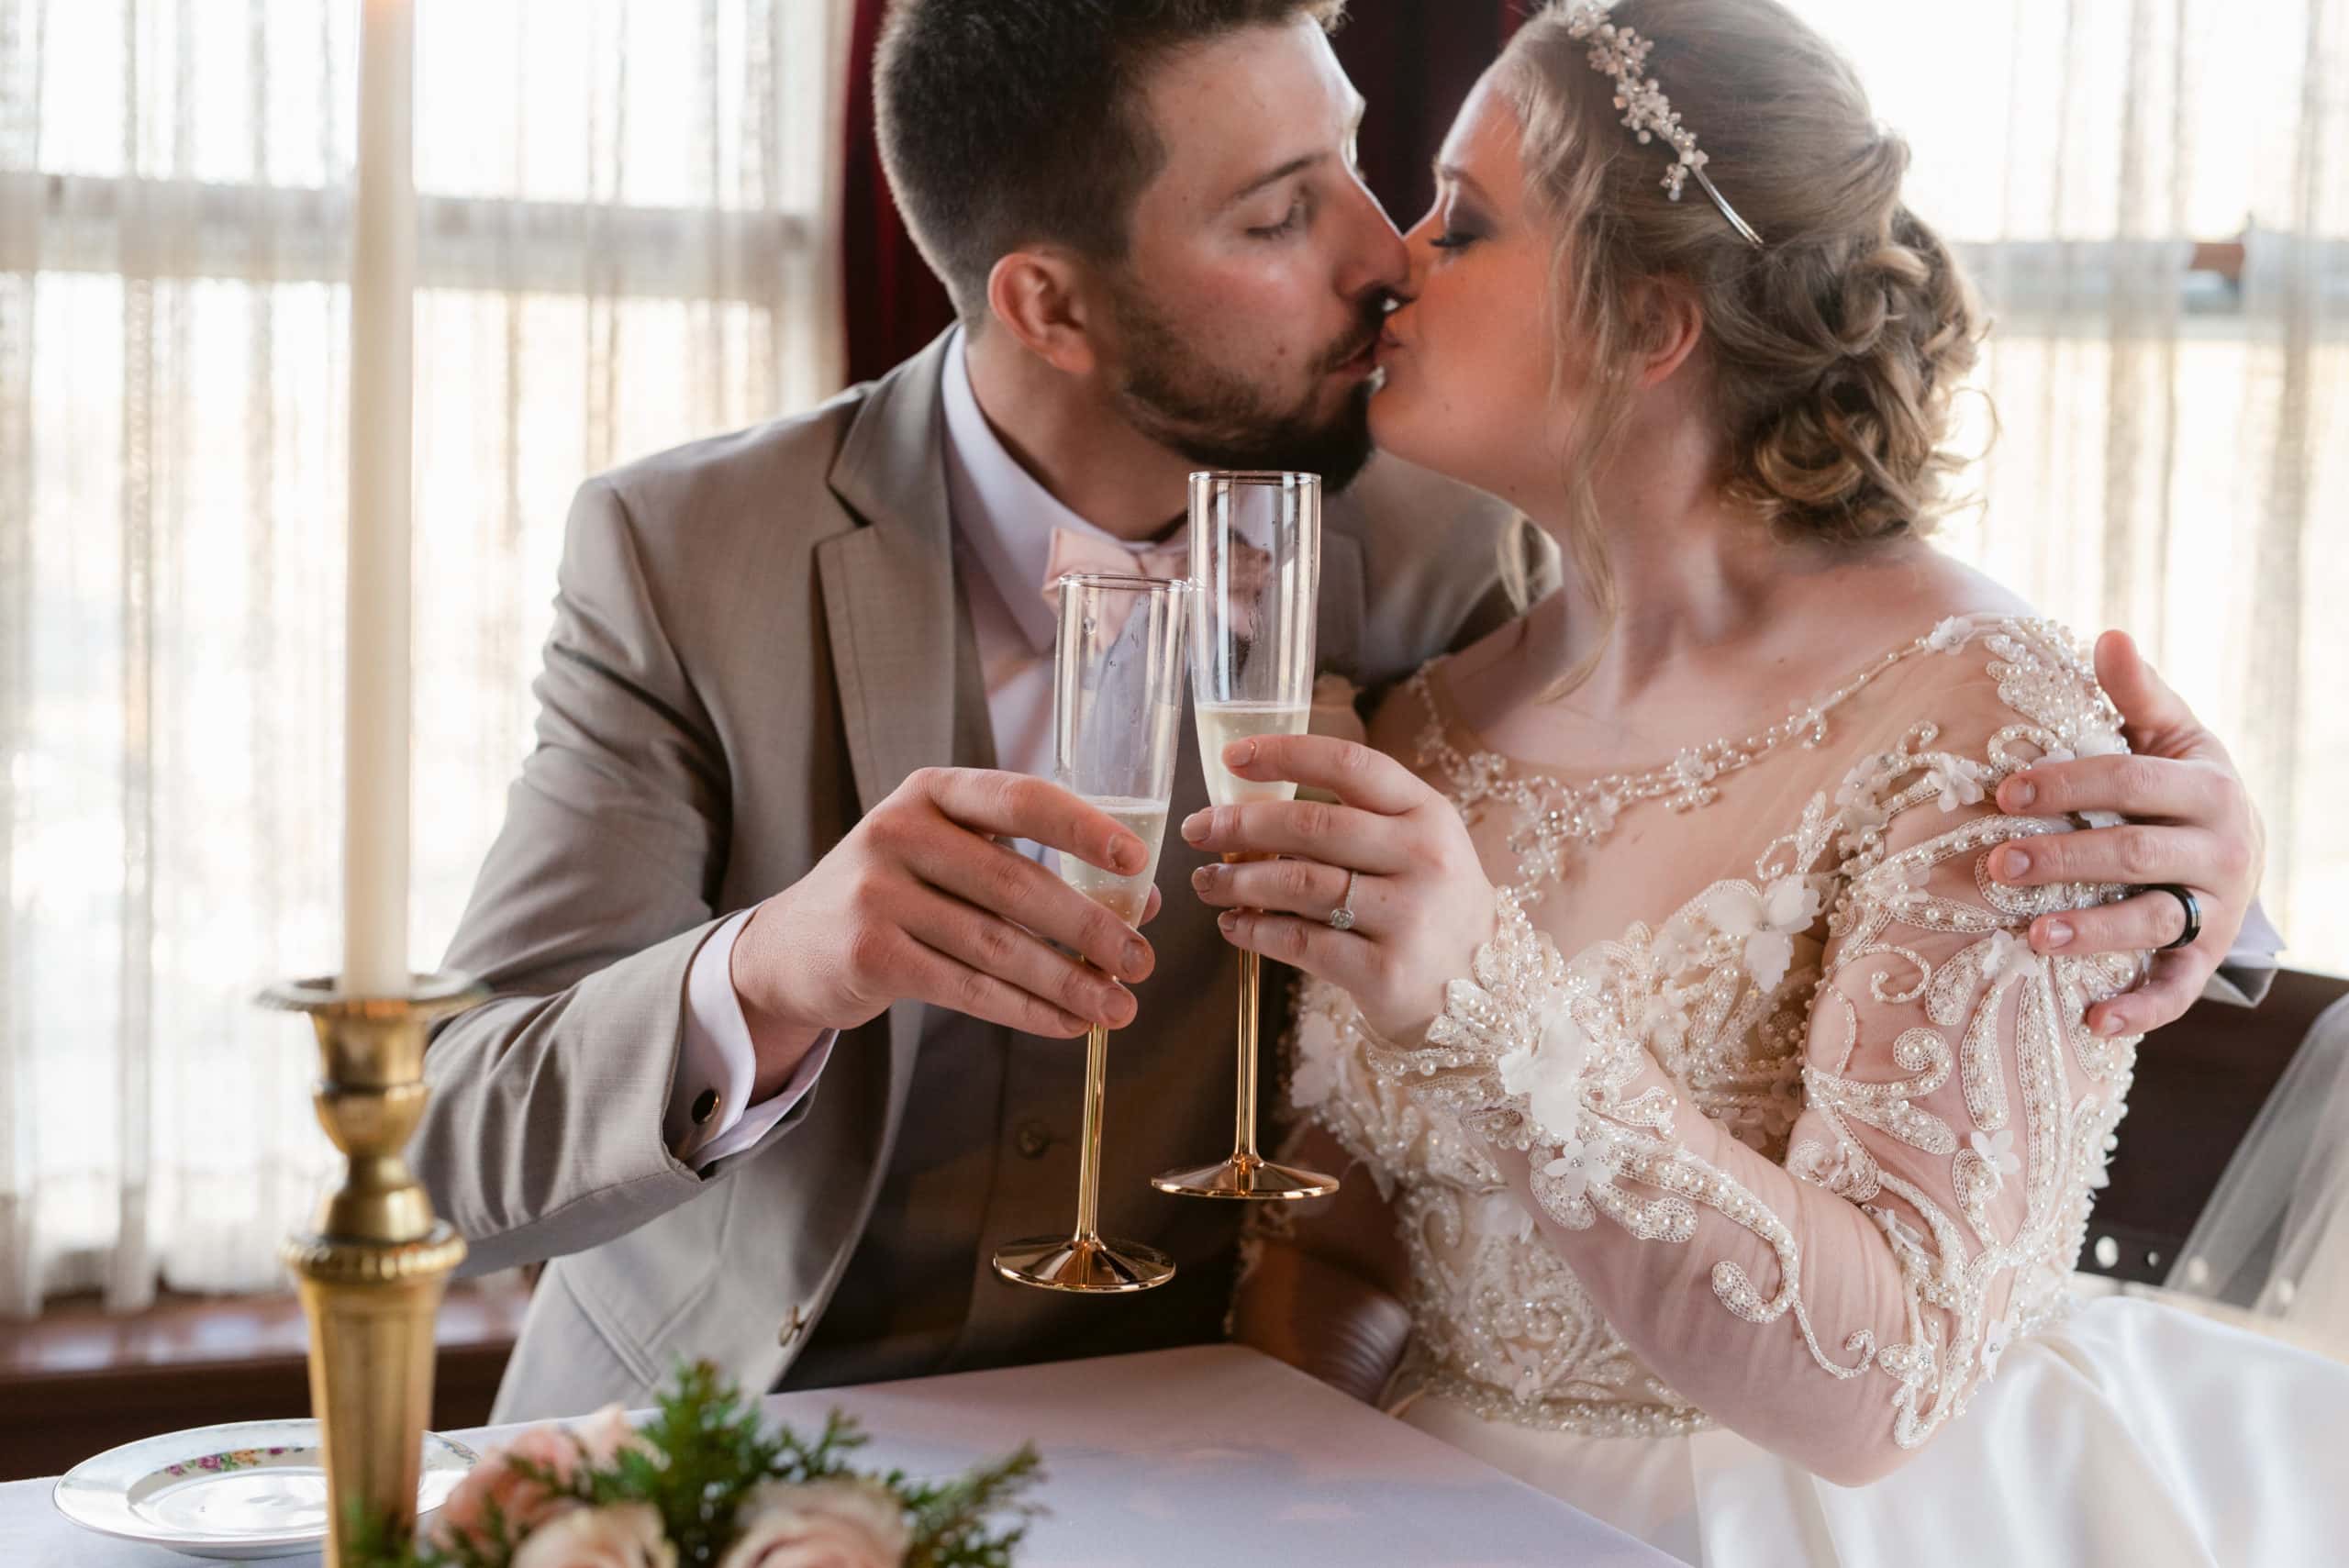 couple kissing, toasting glasses during their wedding reception